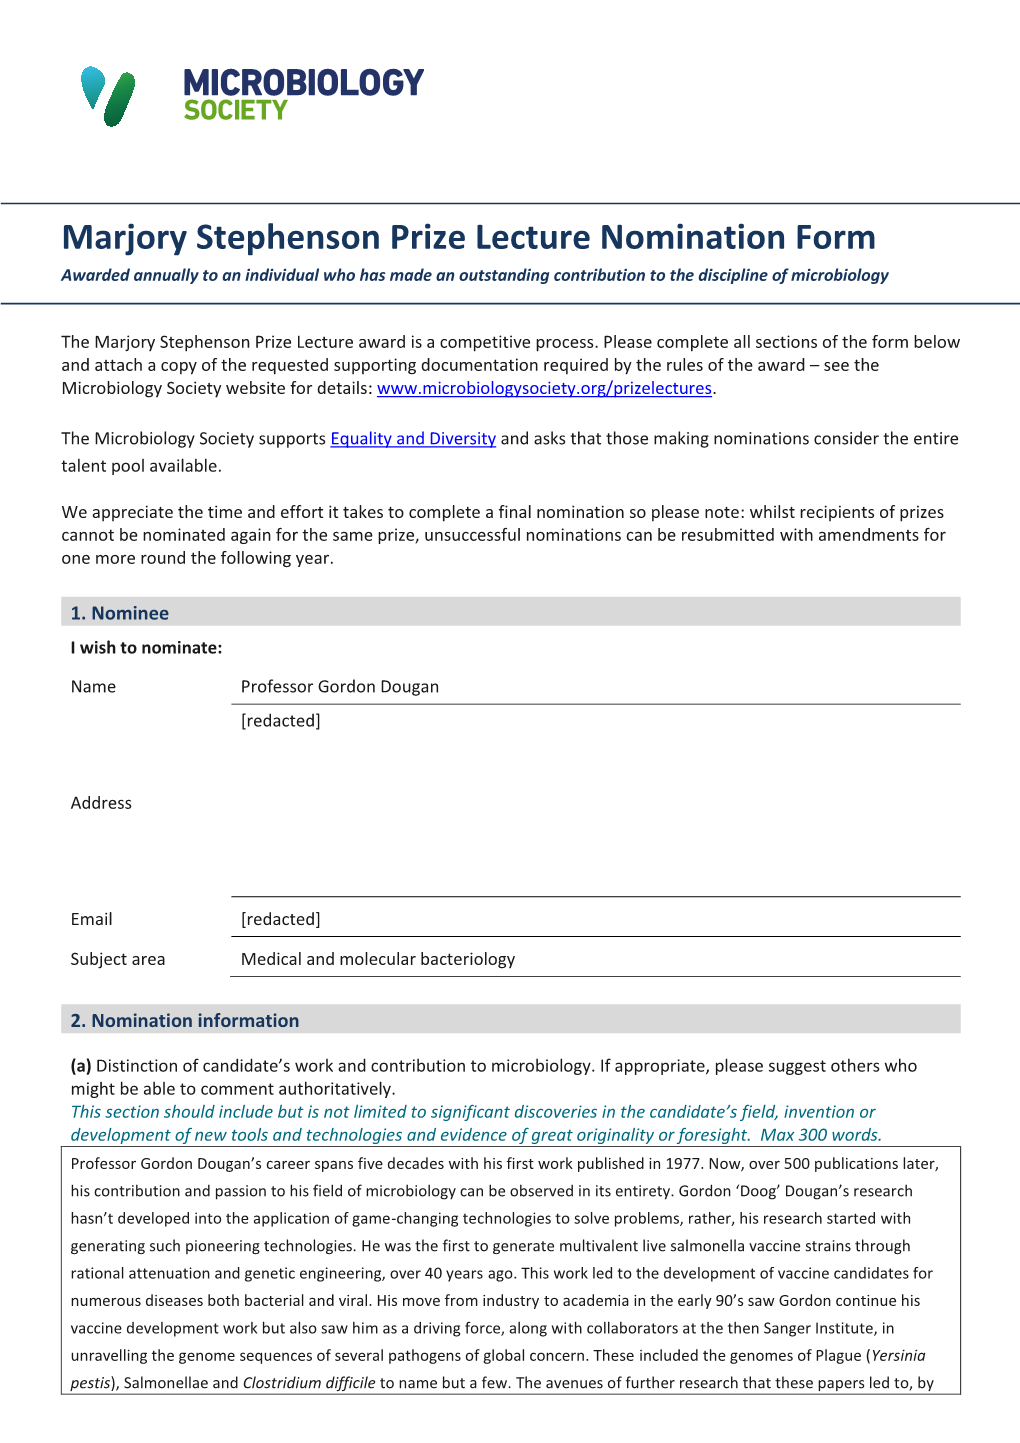 Marjory Stephenson Prize Lecture Nomination Form Awarded Annually to an Individual Who Has Made an Outstanding Contribution to the Discipline of Microbiology